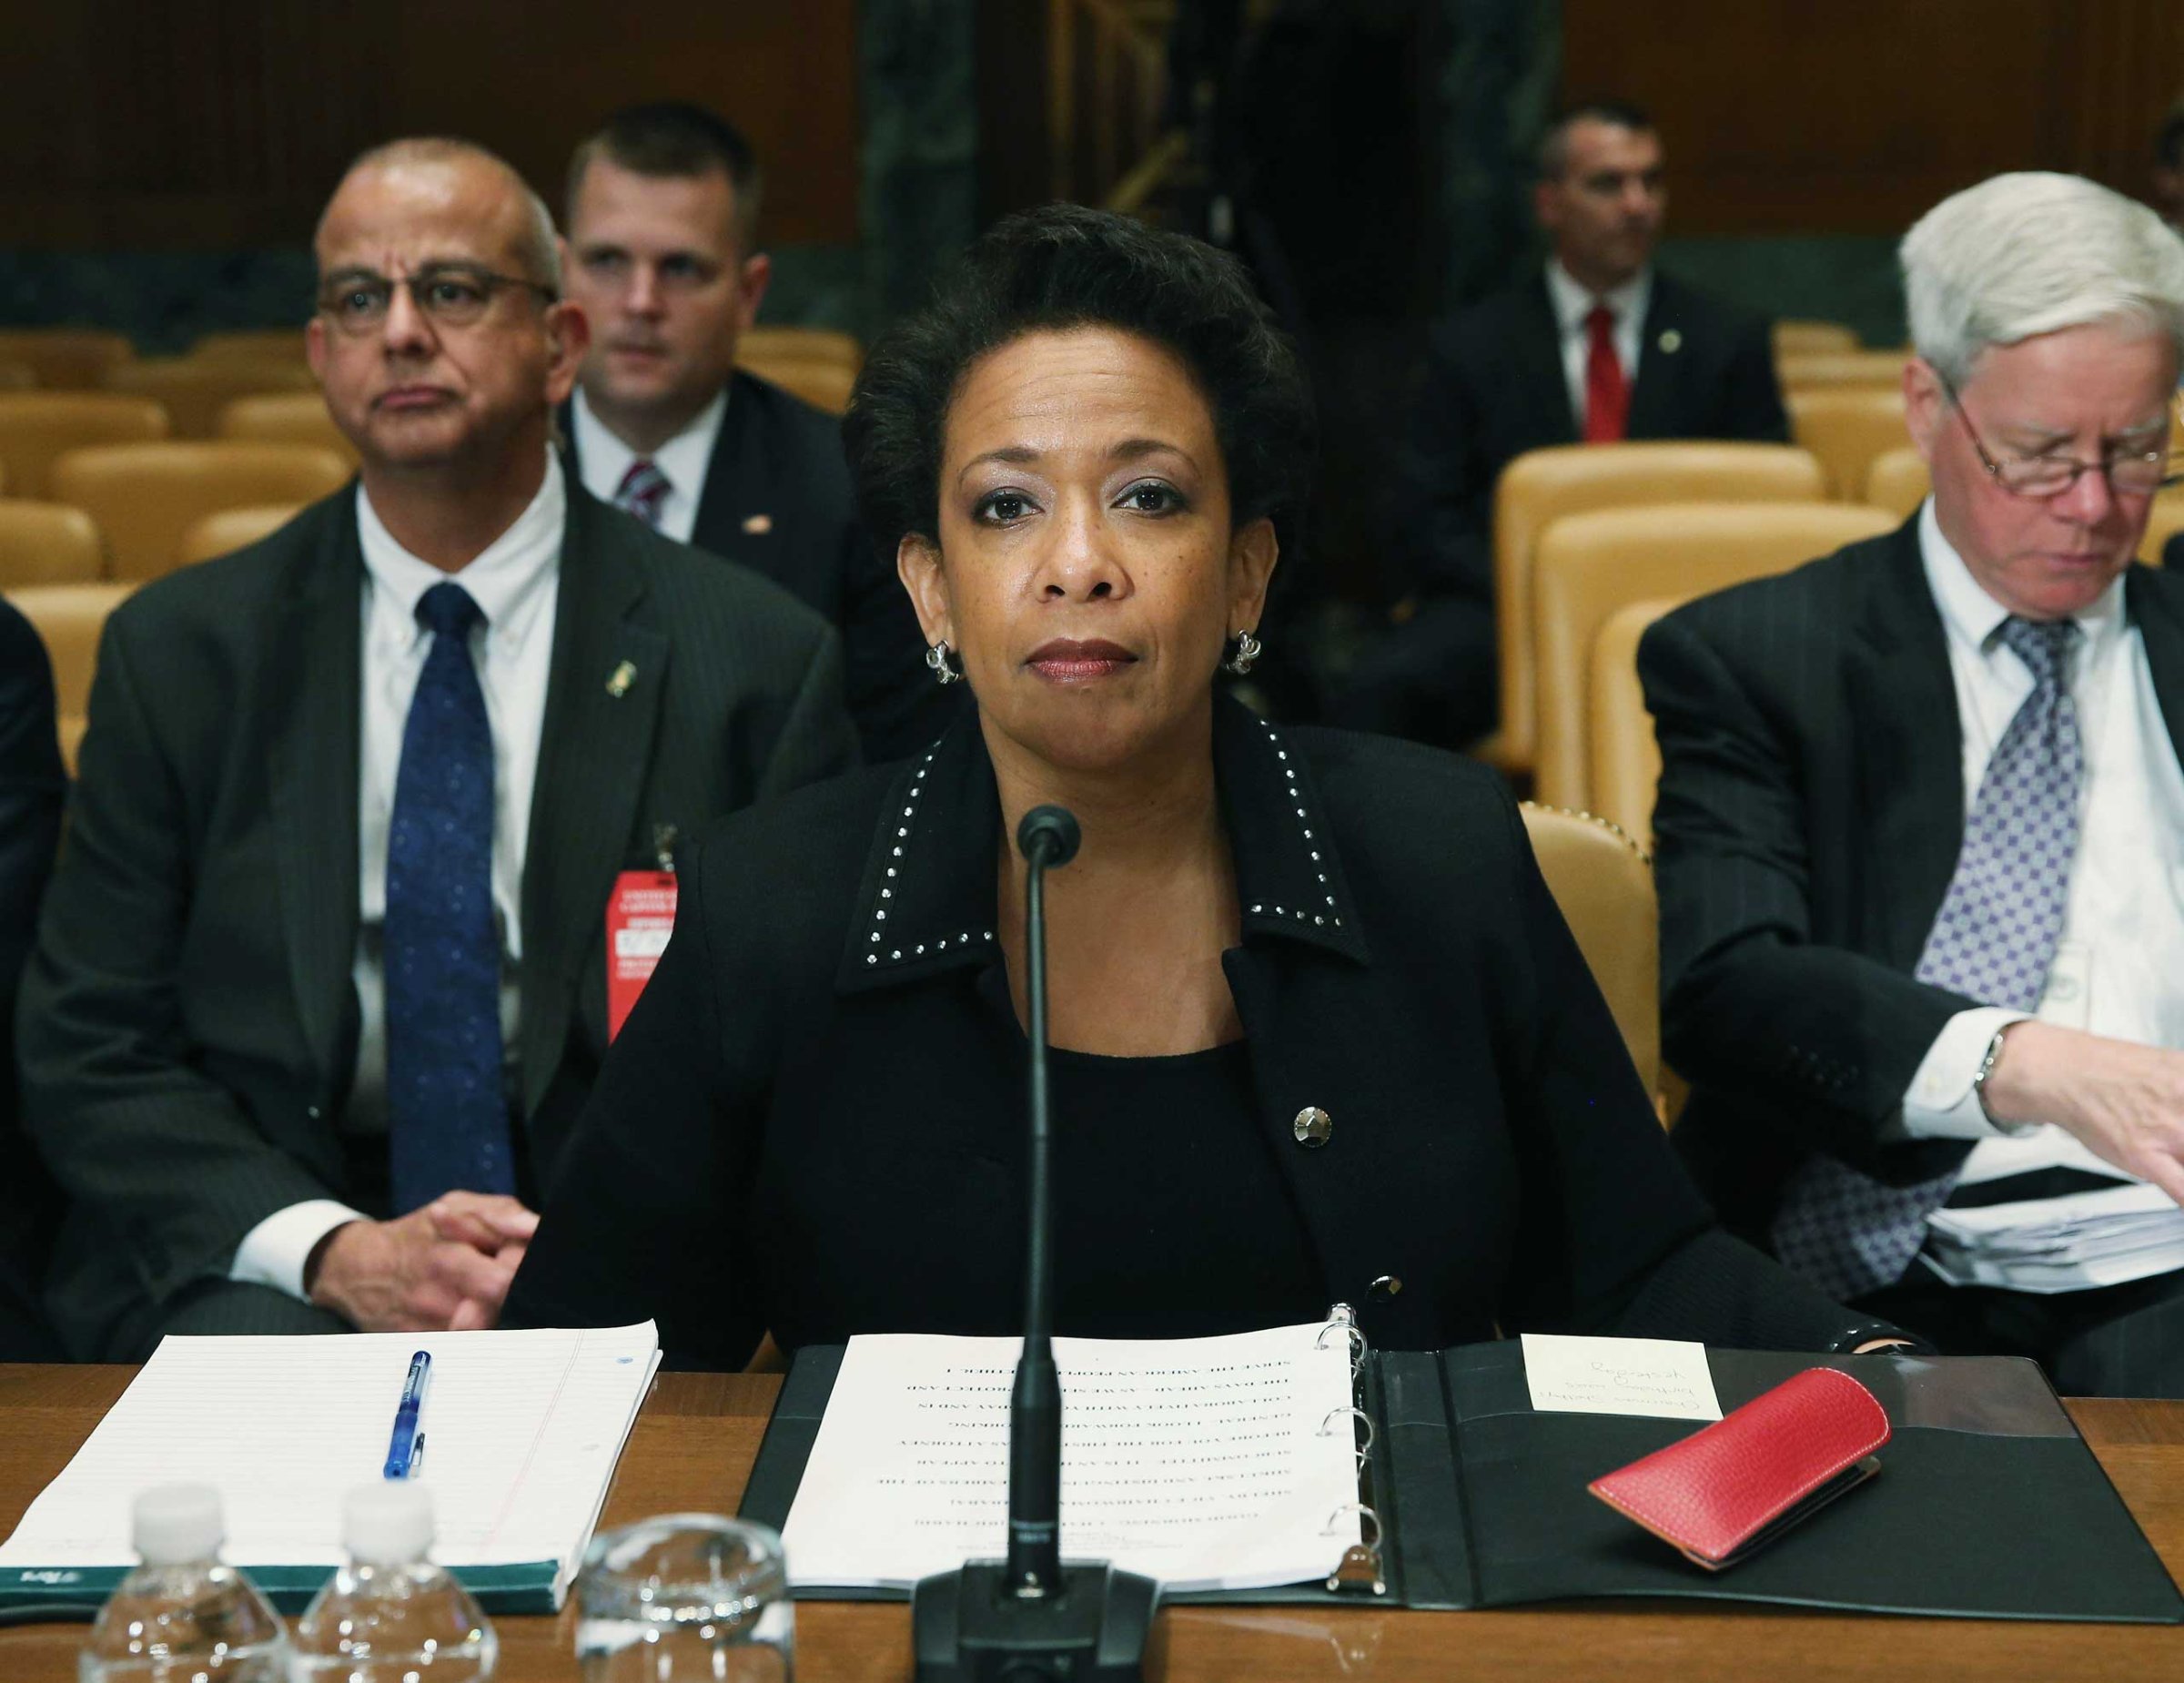 U.S. Attorney General Loretta Lynch appears before the Senate Appropriations Committee on Capitol Hill in Washington on May 7, 2015.